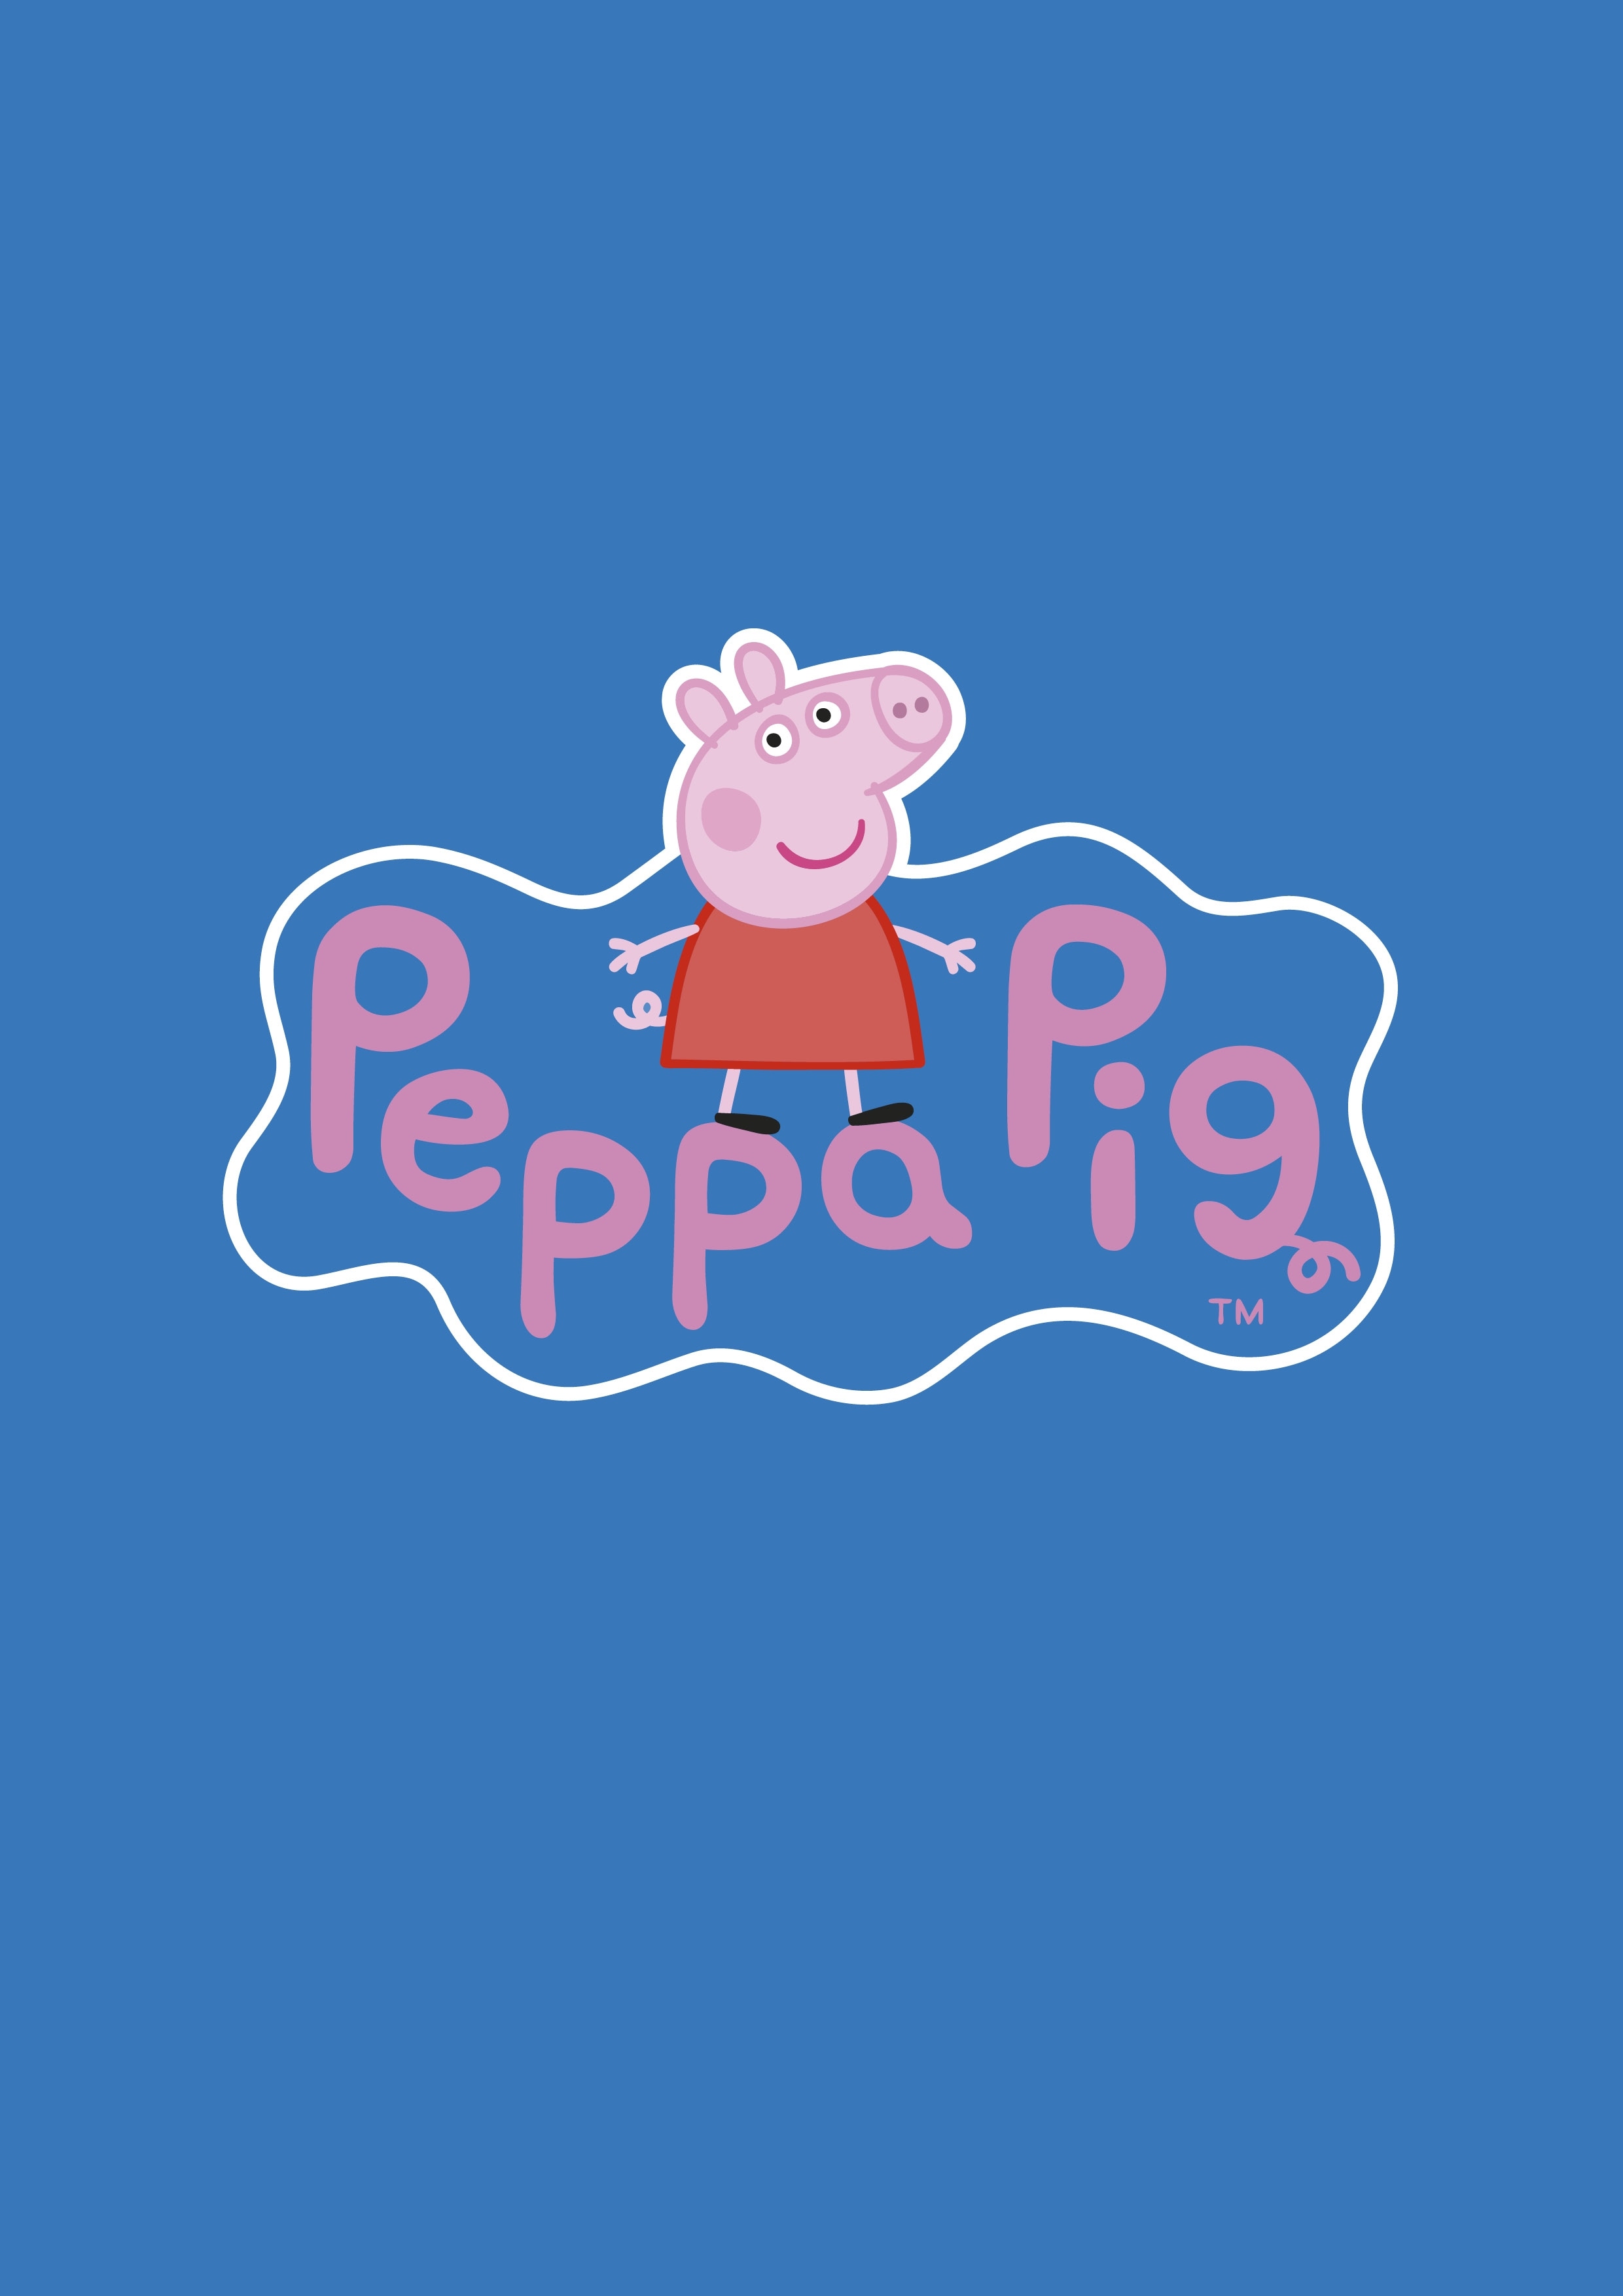 Book “Peppa Pig: Practise with Peppa: Ultimate Phonics” by Peppa Pig — July 21, 2022